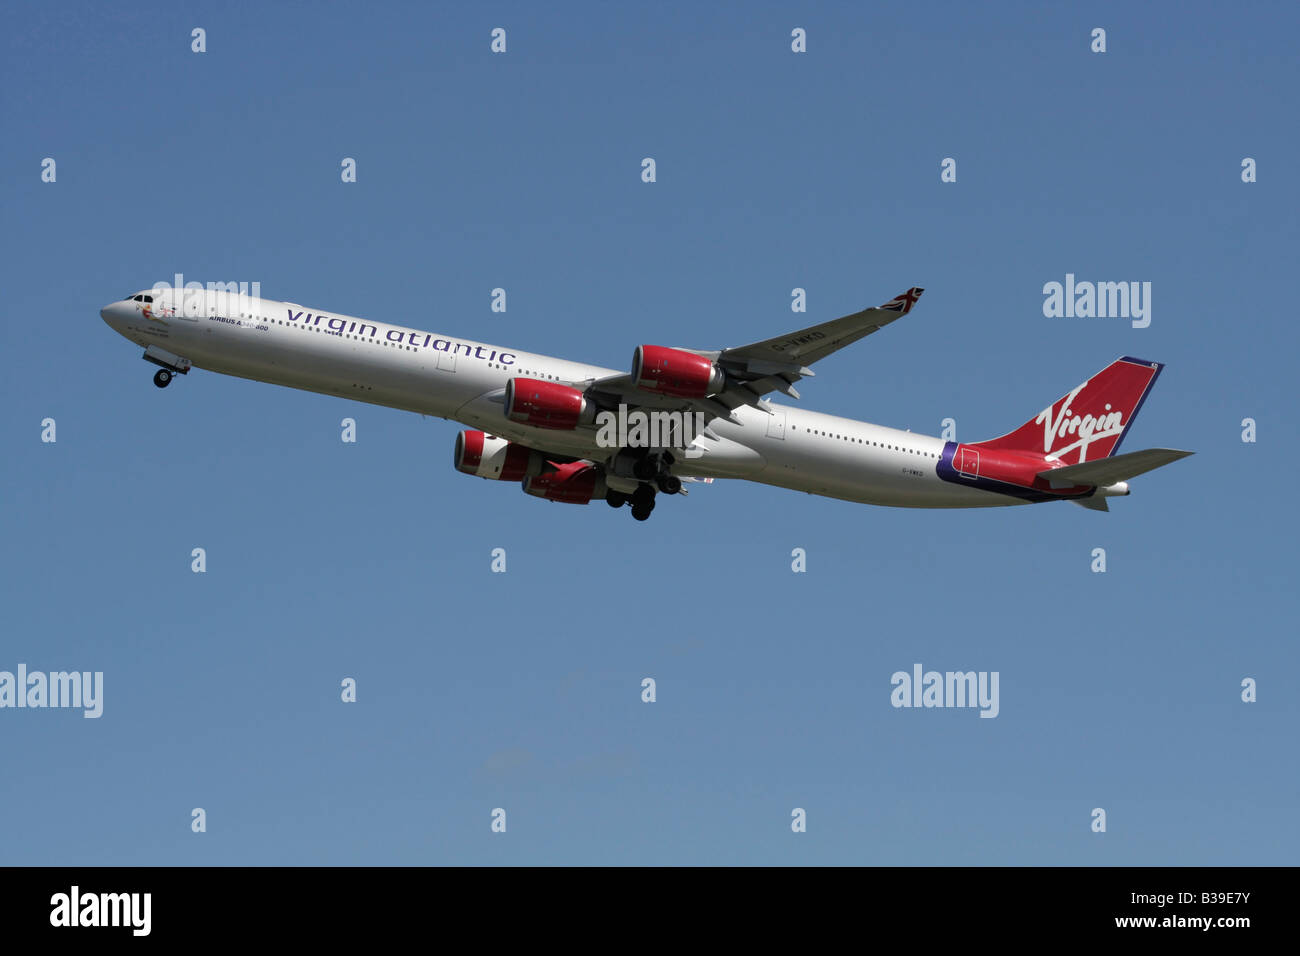 Virgin Atlantic Airways Airbus A340-600 long haul passenger aeroplane flying on departure against a blue sky. Side view. Stock Photo